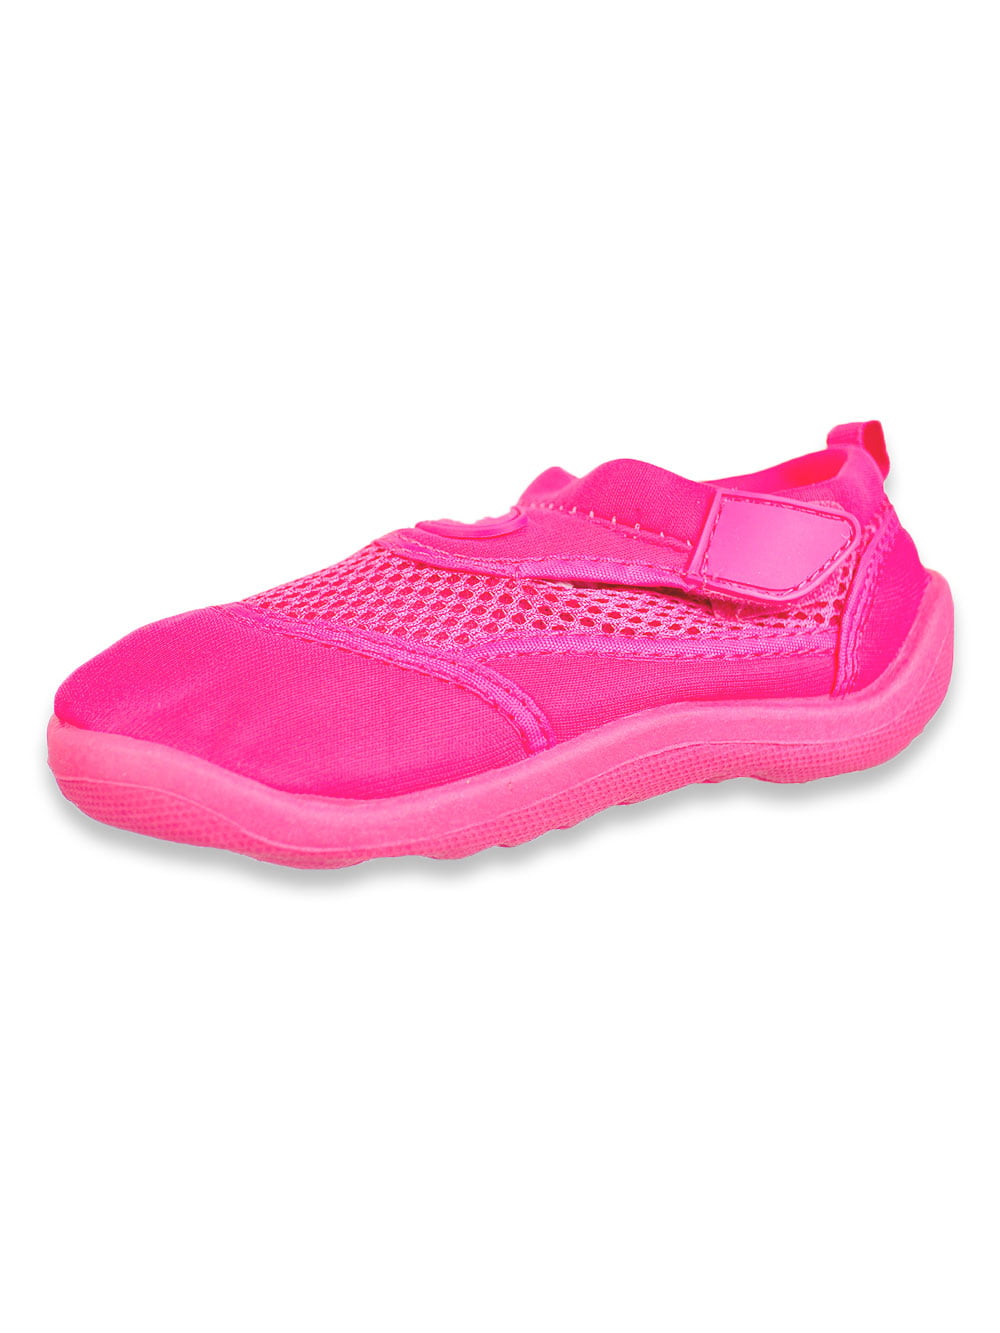 show original title Details about   Bathing Shoes Children Womens Beach Shoes Water Shoes Size 22-46 Fall Small!!!